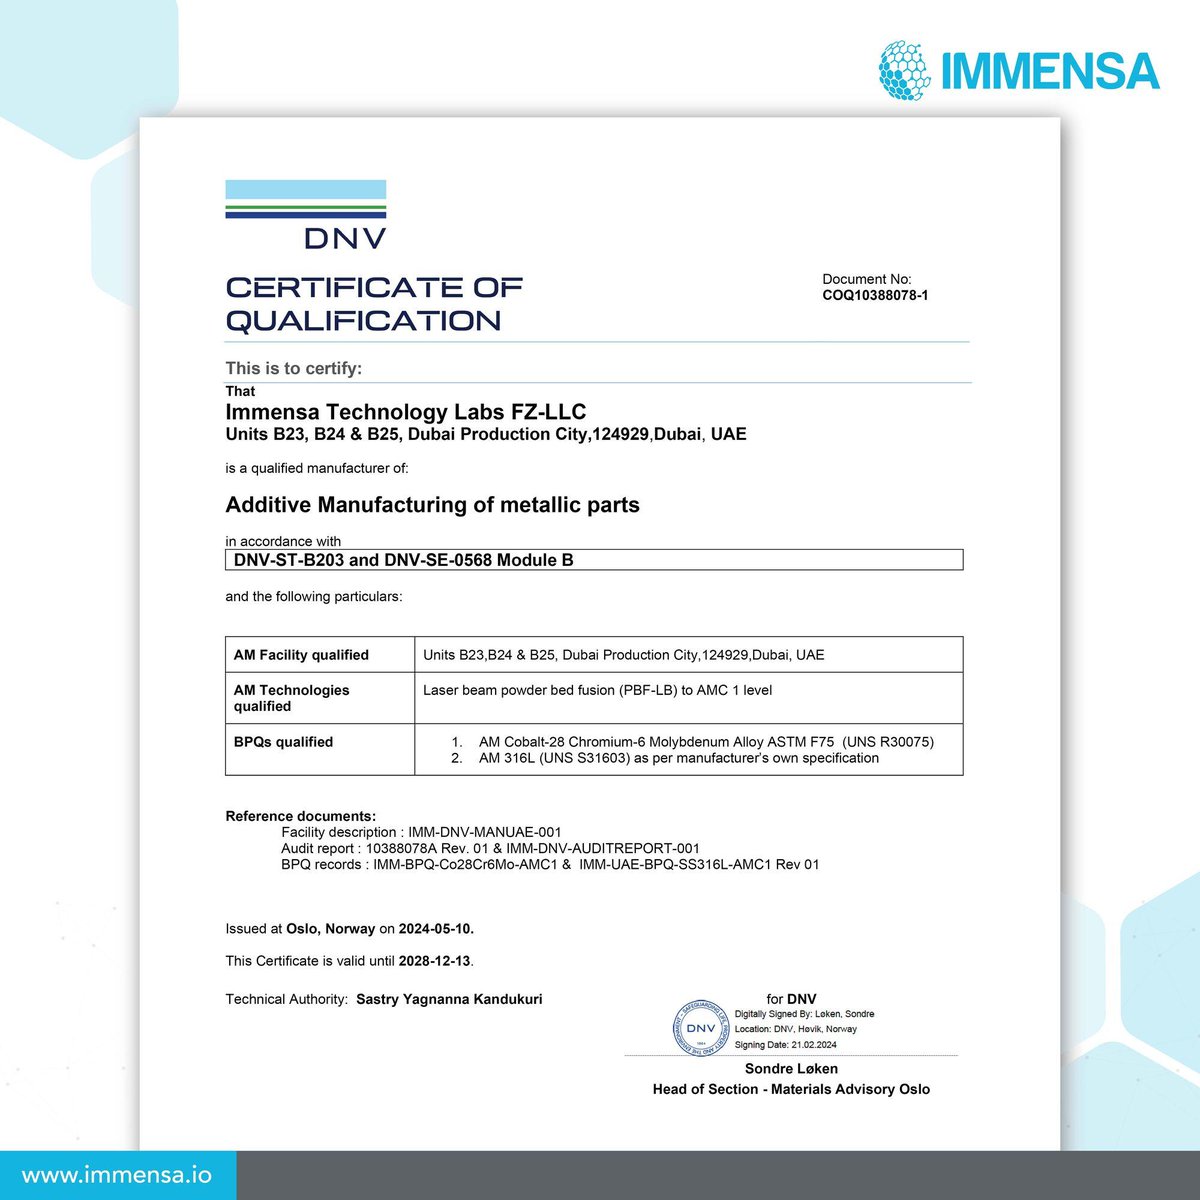 Immensa is proud to announce the addition of CoCr Alloy (UNS R30075) and SS316L (UNSS31603) to our list of DNV-certified #additivemanufacturing materials for our UAE facility.